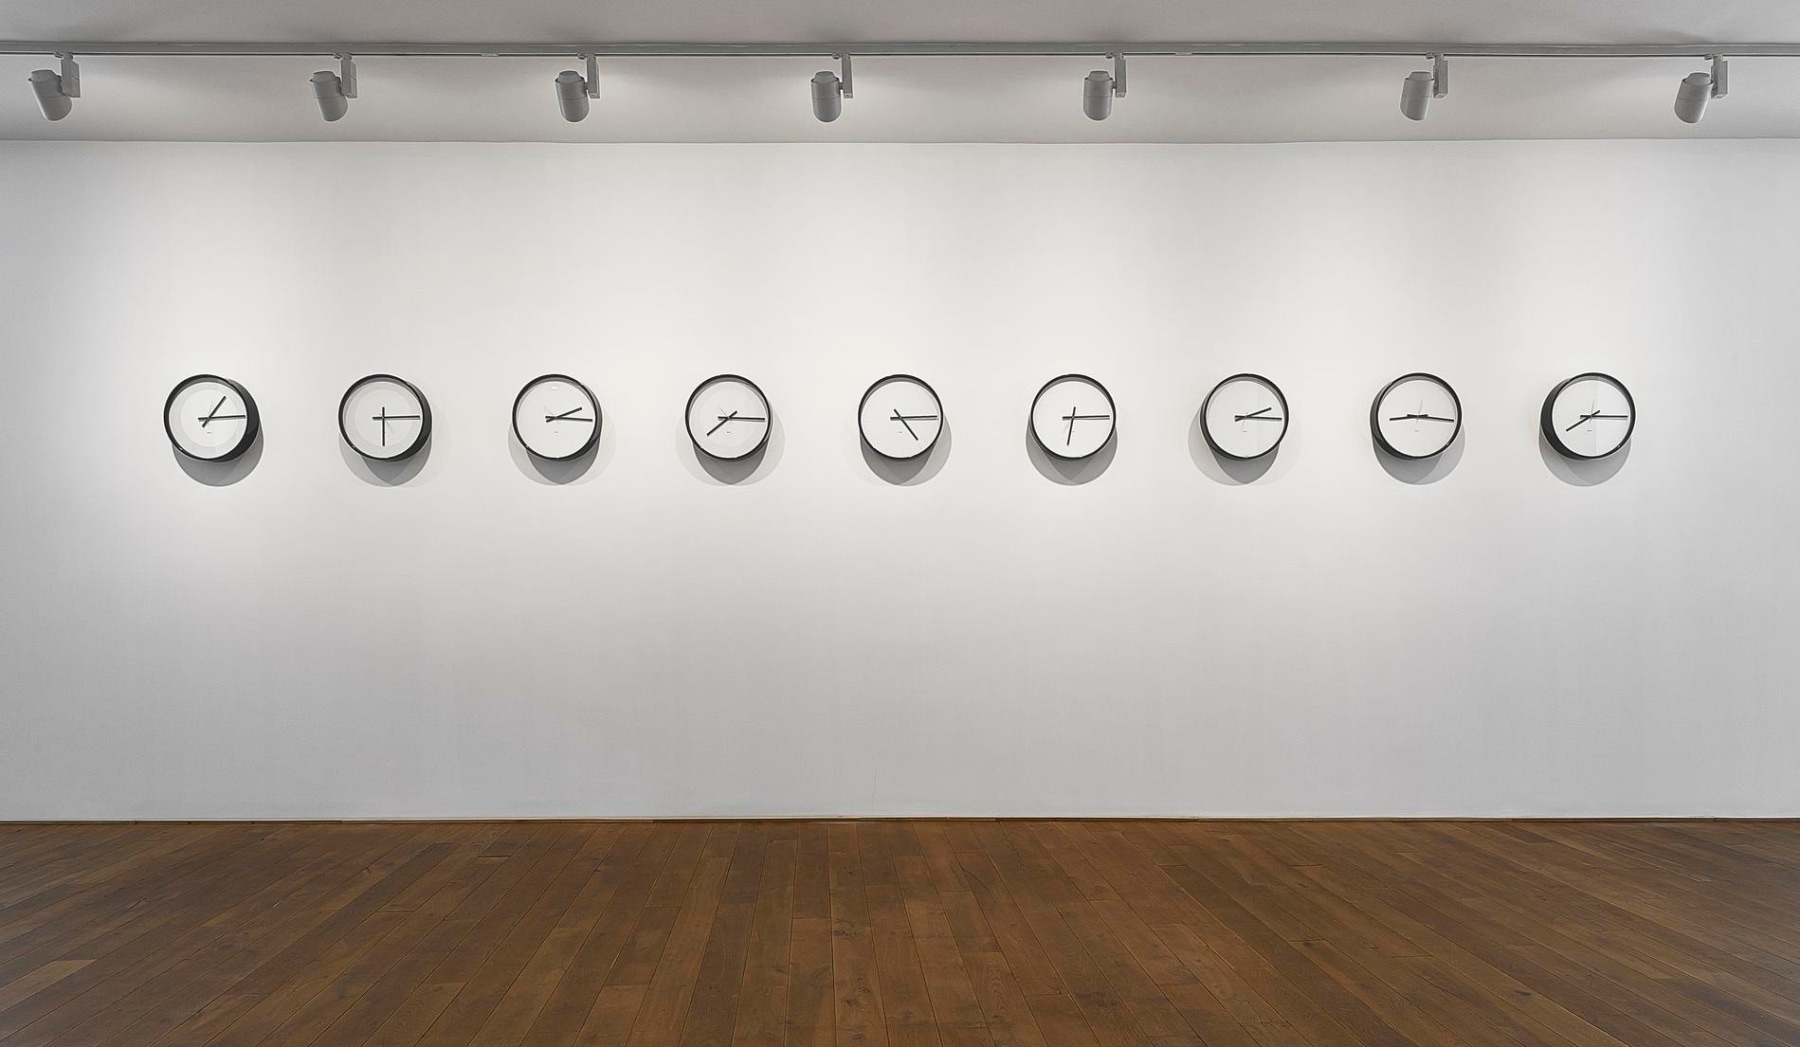 Image of KATIE PATERSON's Timepieces (Solar System), 2014